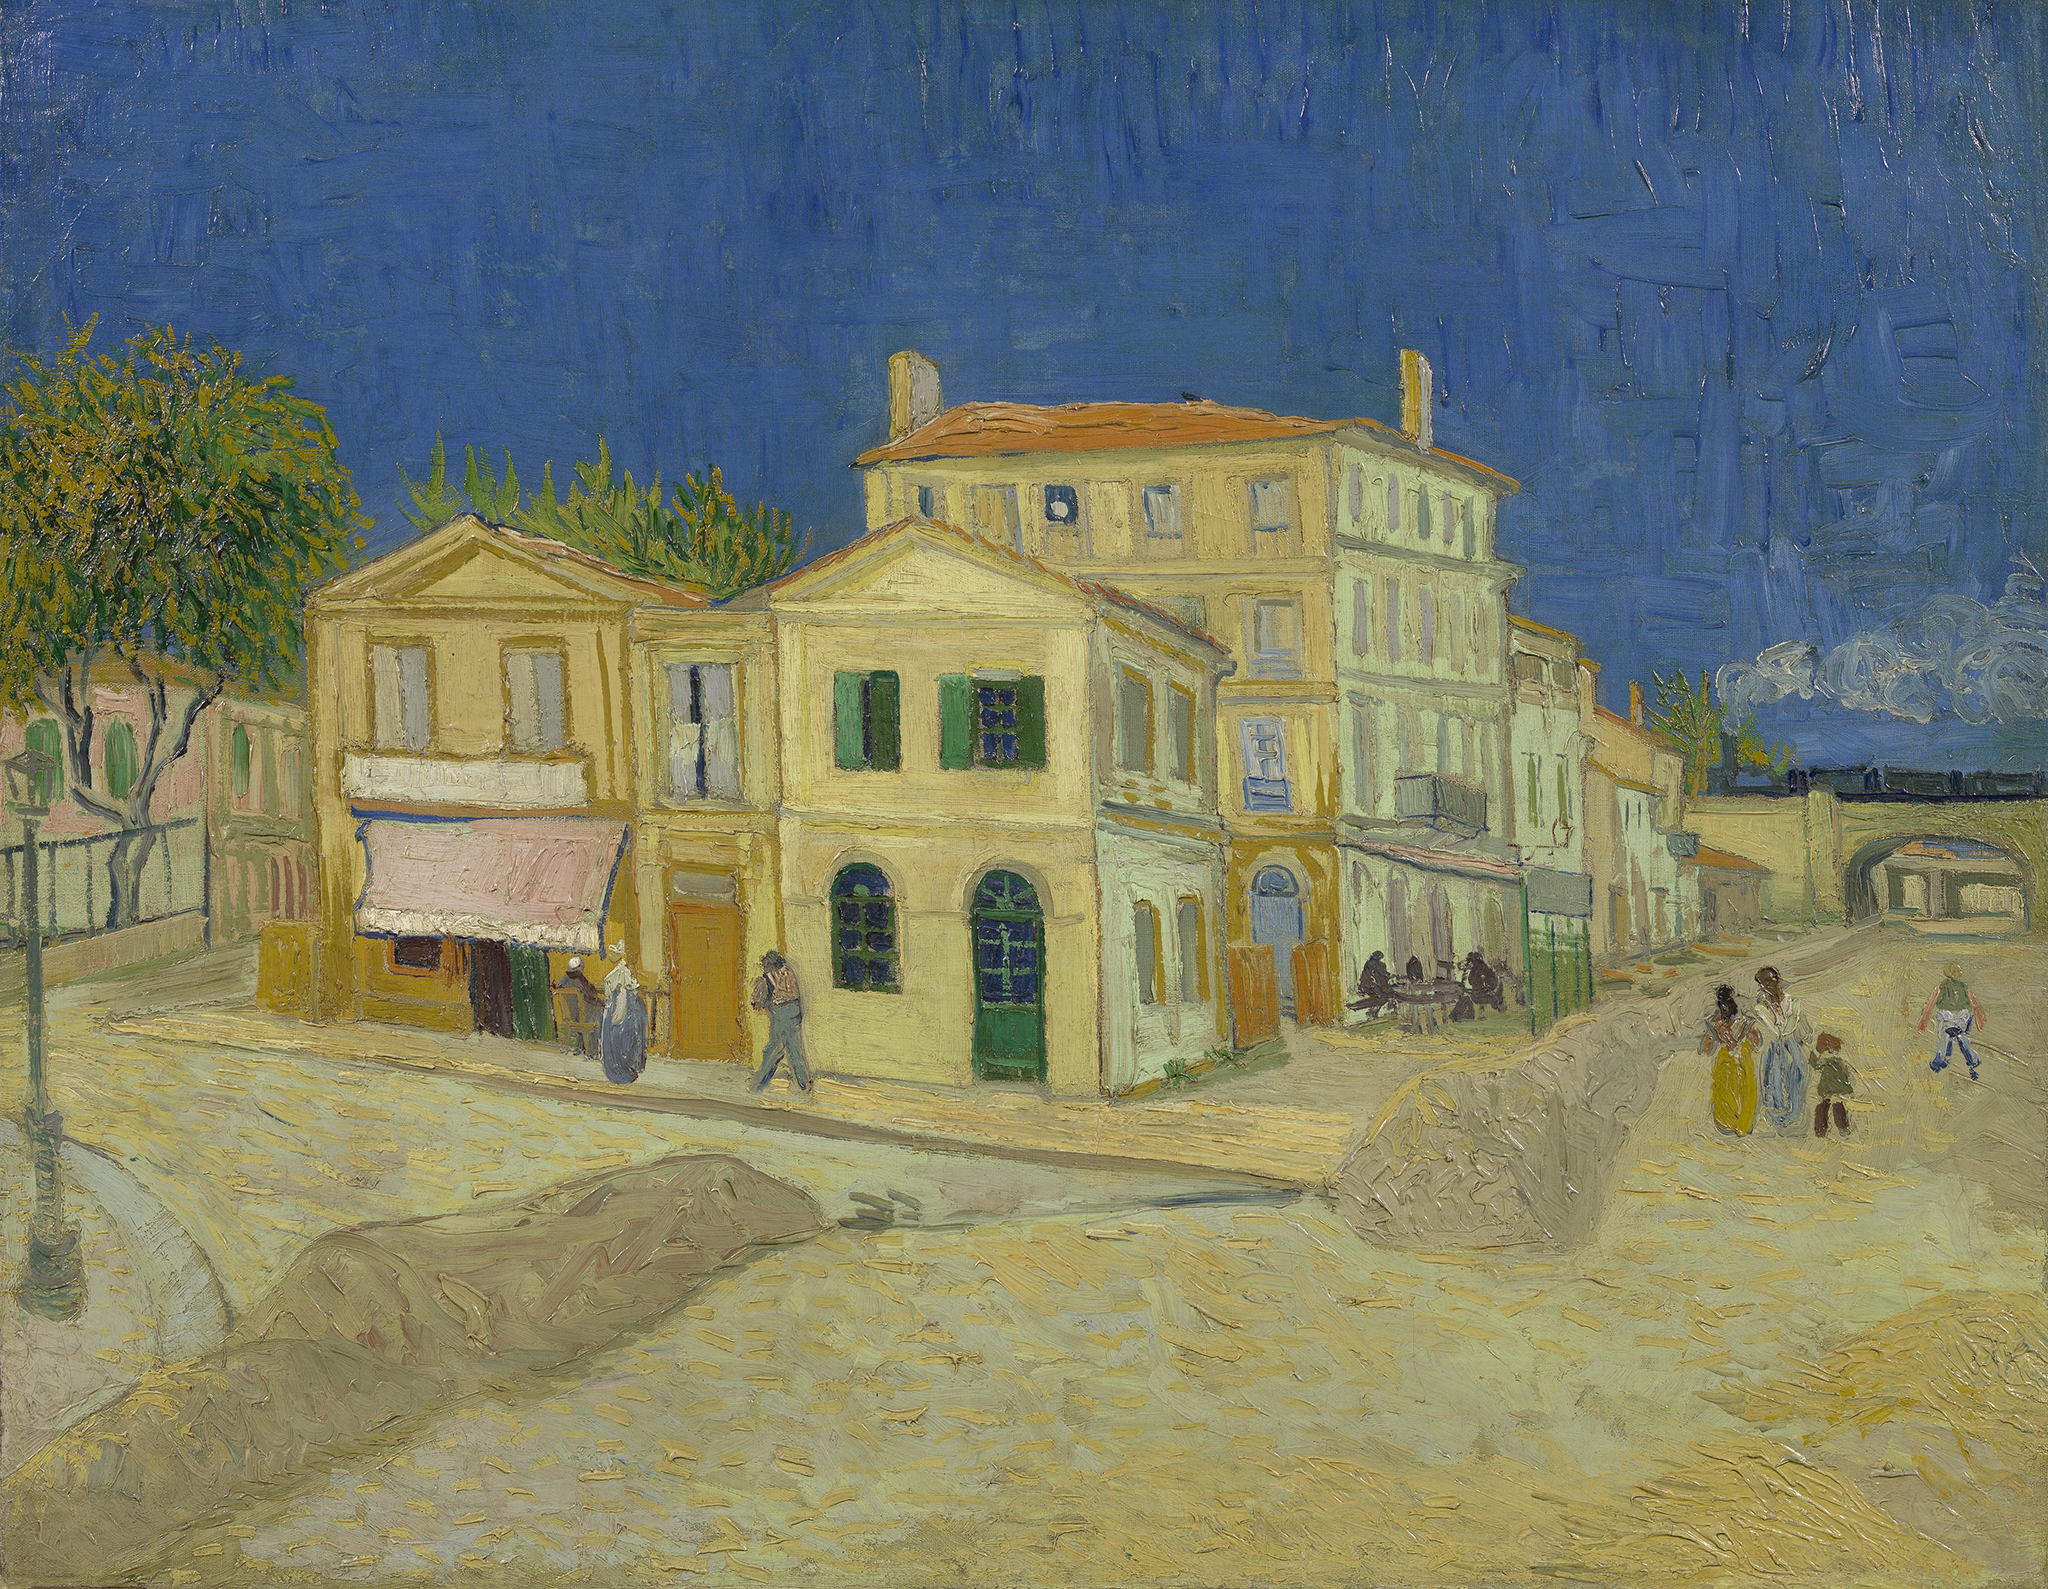 A painting of a street corner with buildings bundled up together overlooking the road and sidewalks that surround them. The buildings are colored in a yellow and a light green. People are walking along the sidewalk and on the road. In the background consists of a dark blue sky along with steam or smoke from a chimney.